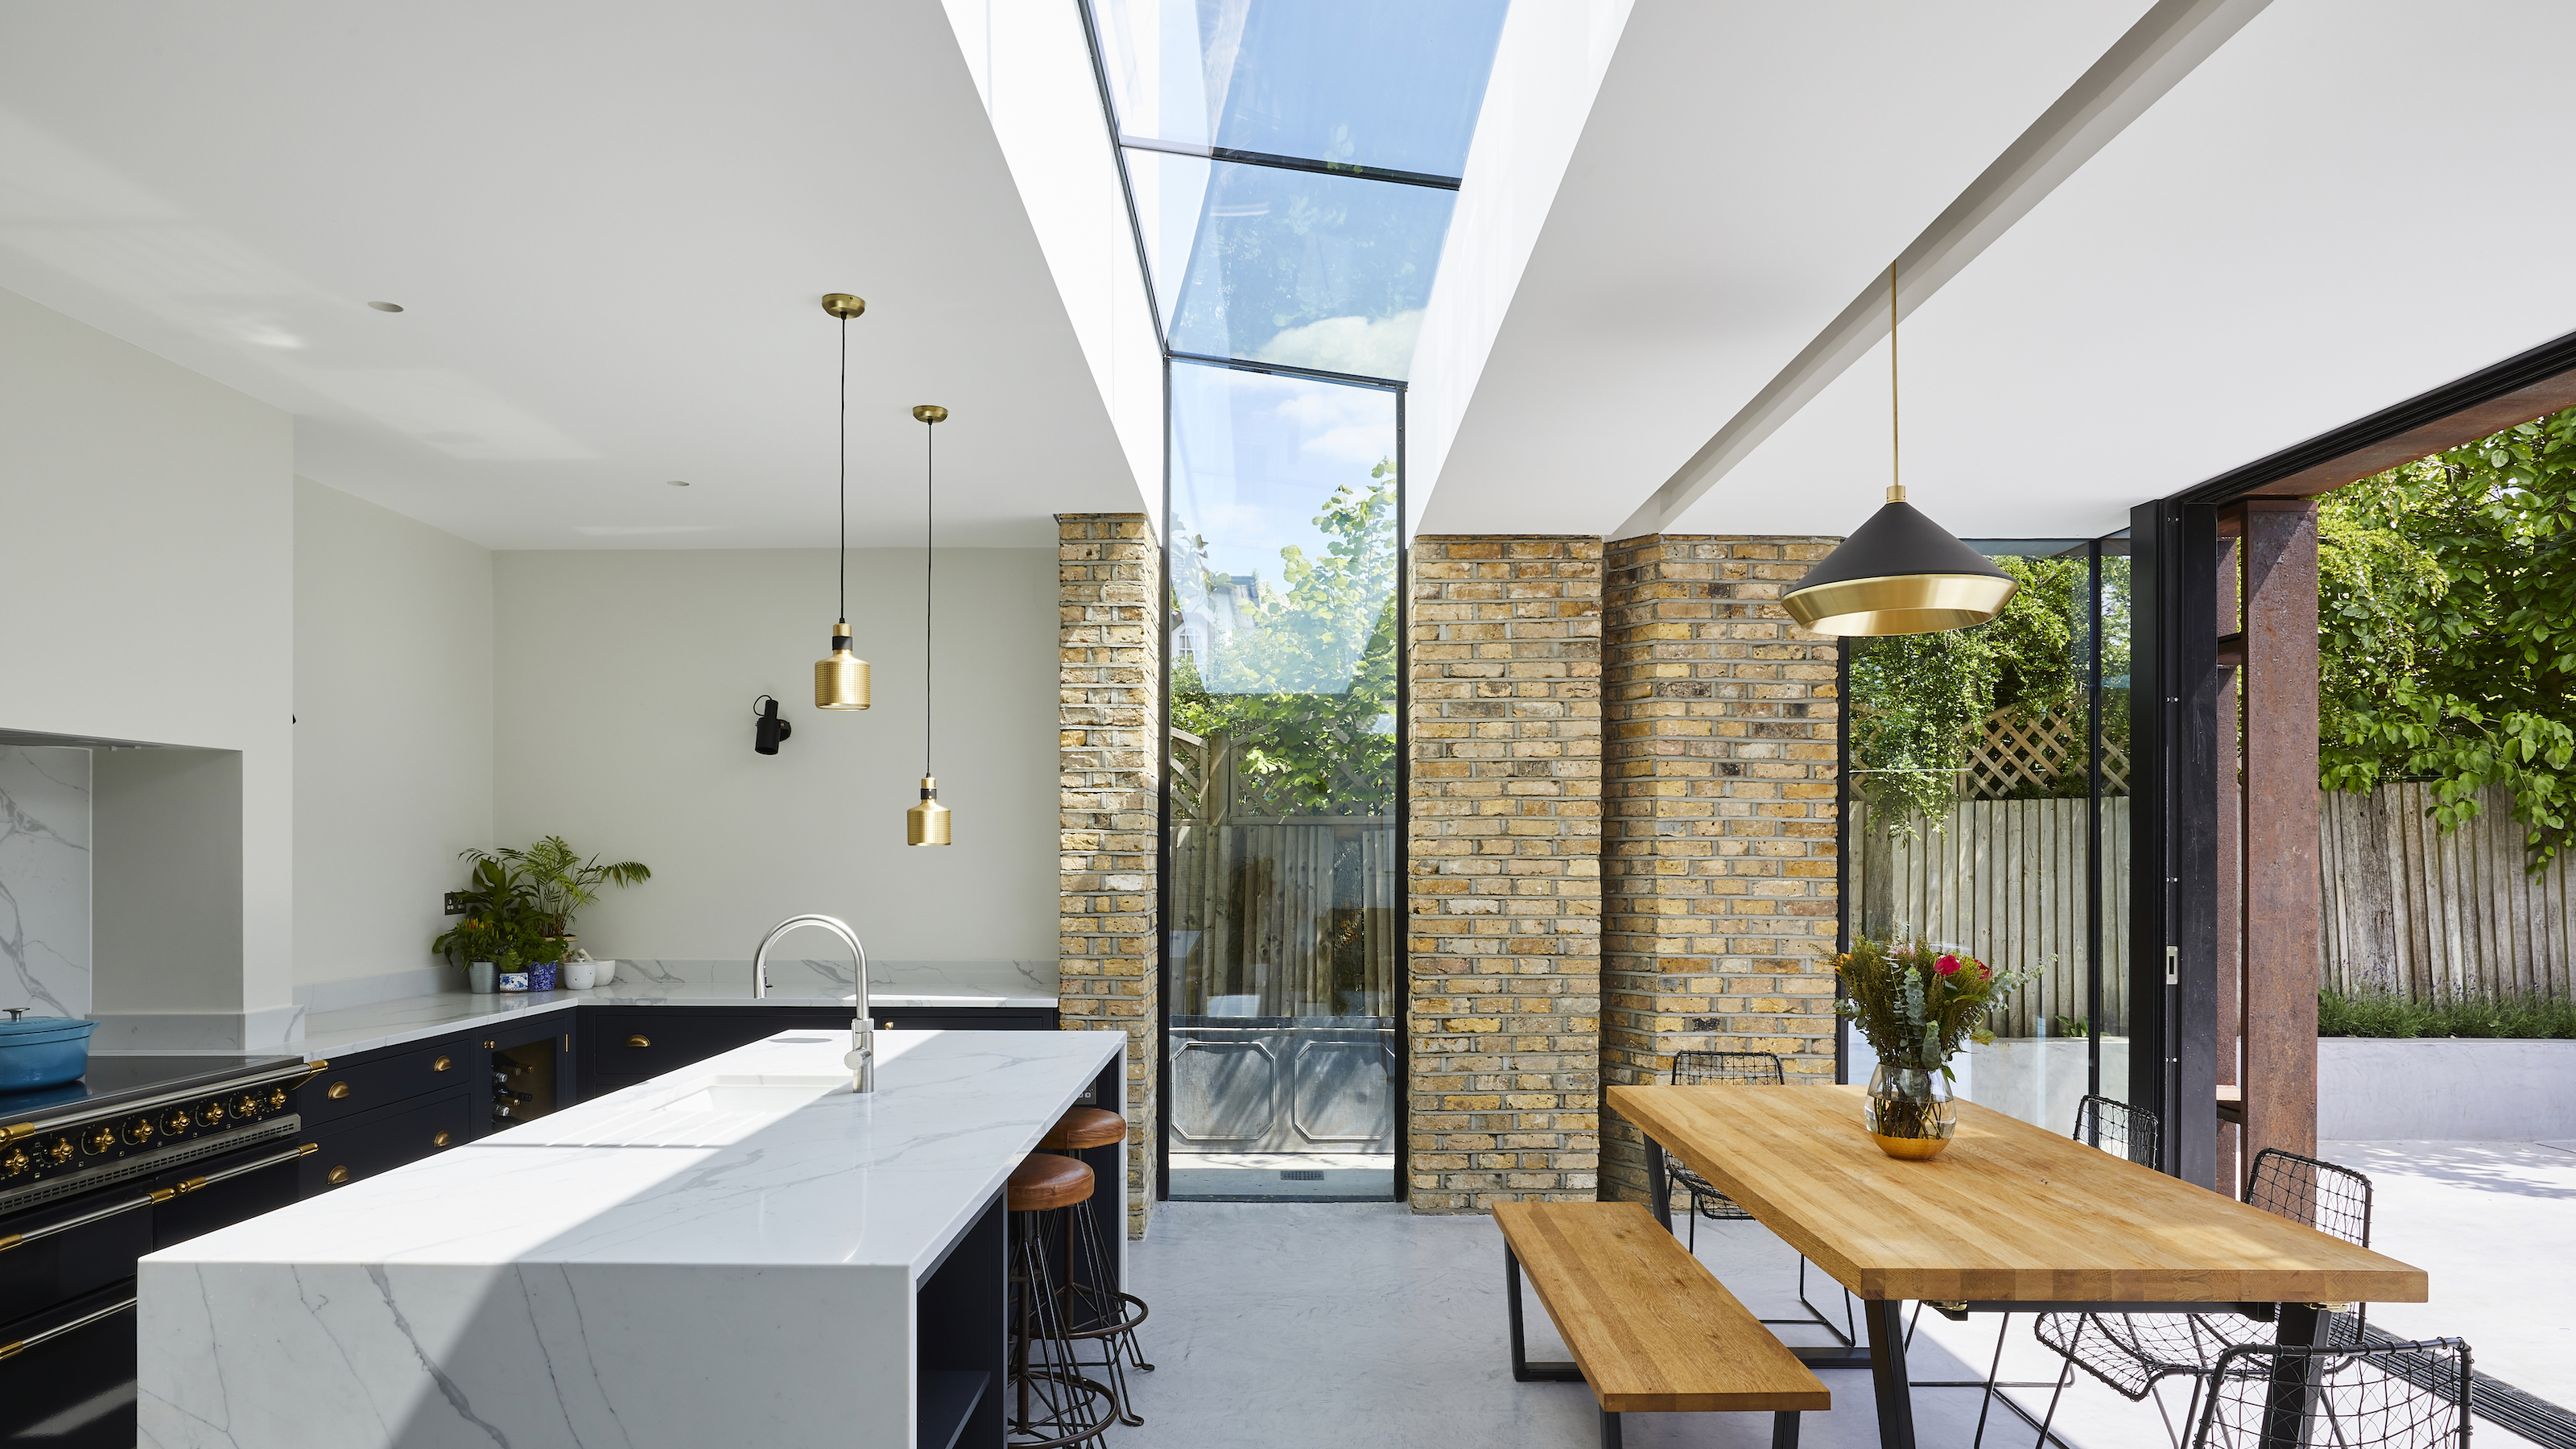 How to plan a kitchen extension with skylights   Homebuilding